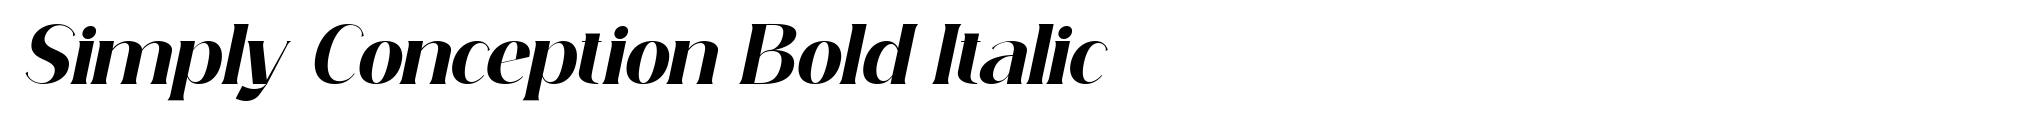 Simply Conception Bold Italic image